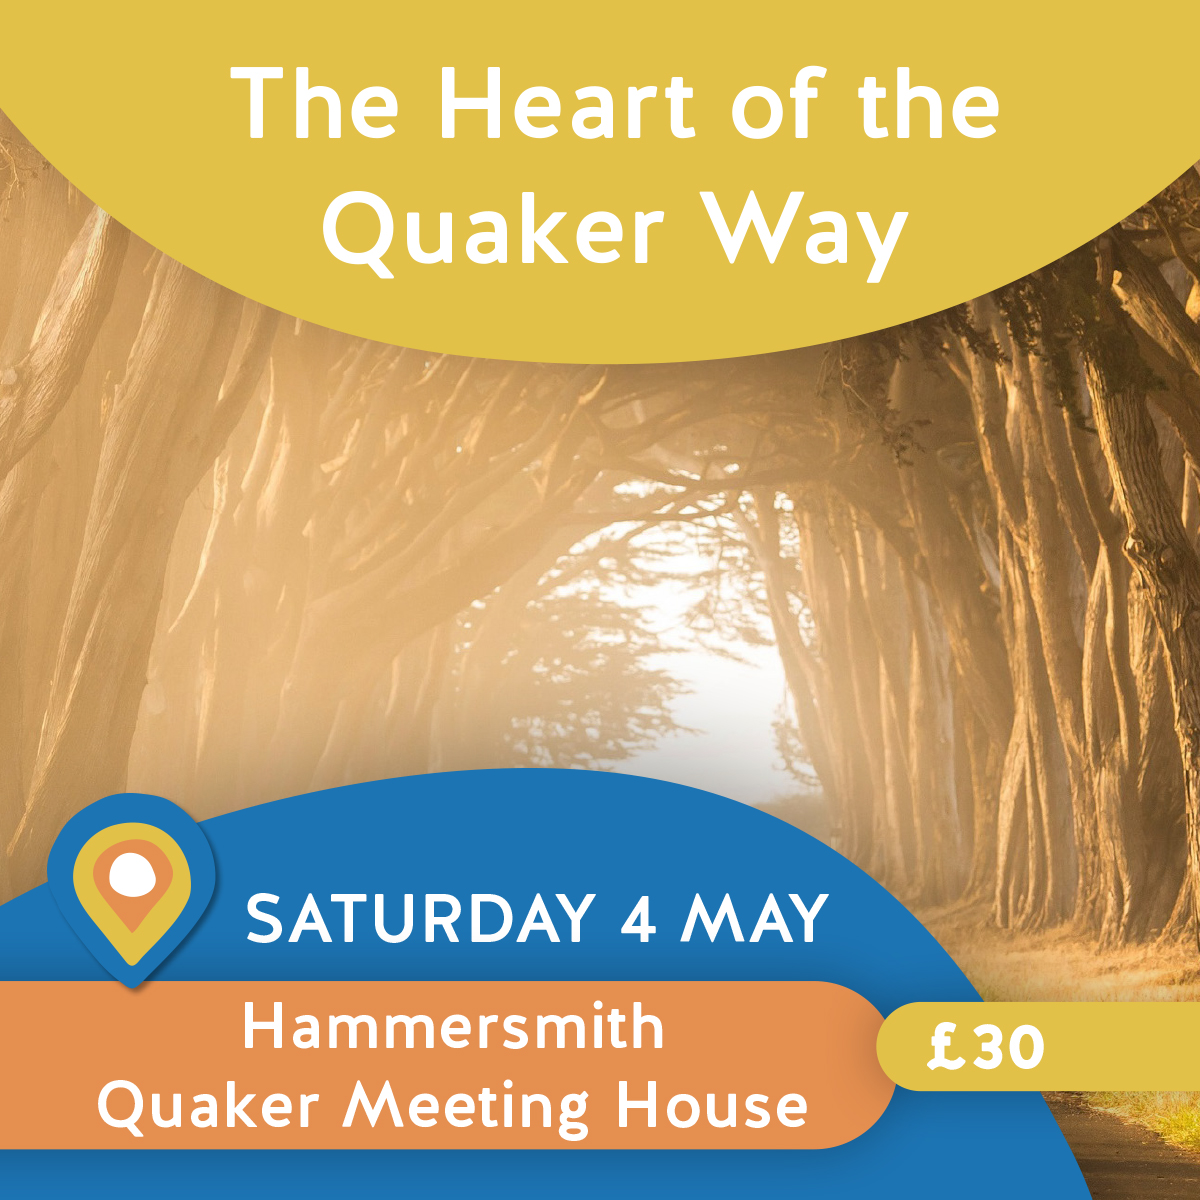 The Quaker way is often portrayed as an individual one or one hard to define. However there is a clear and contained sense of what it is to be a Quaker and how to be Quaker. This day event explores what can be thought of as the heart of the Quaker way. See woodbrooke.org.uk/courses/the-he…